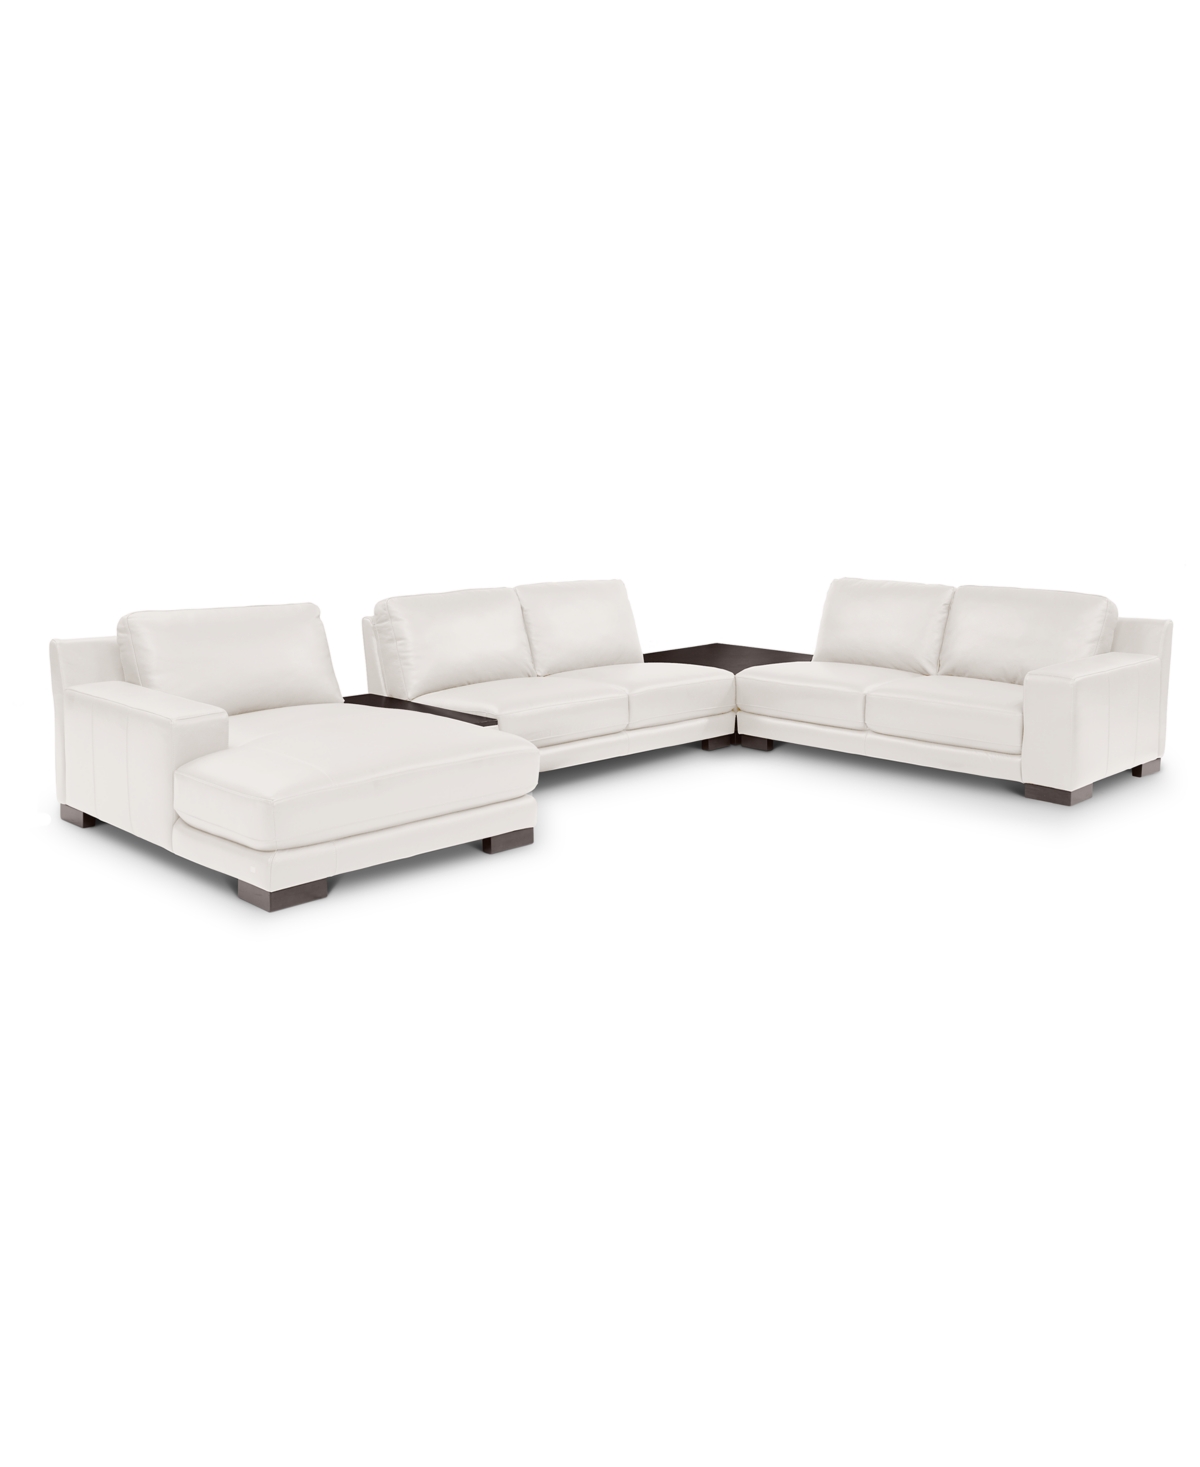 Macy's Darrium 5-pc. Leather Chaise Sectional With Corner Table & Console, Created For  In White